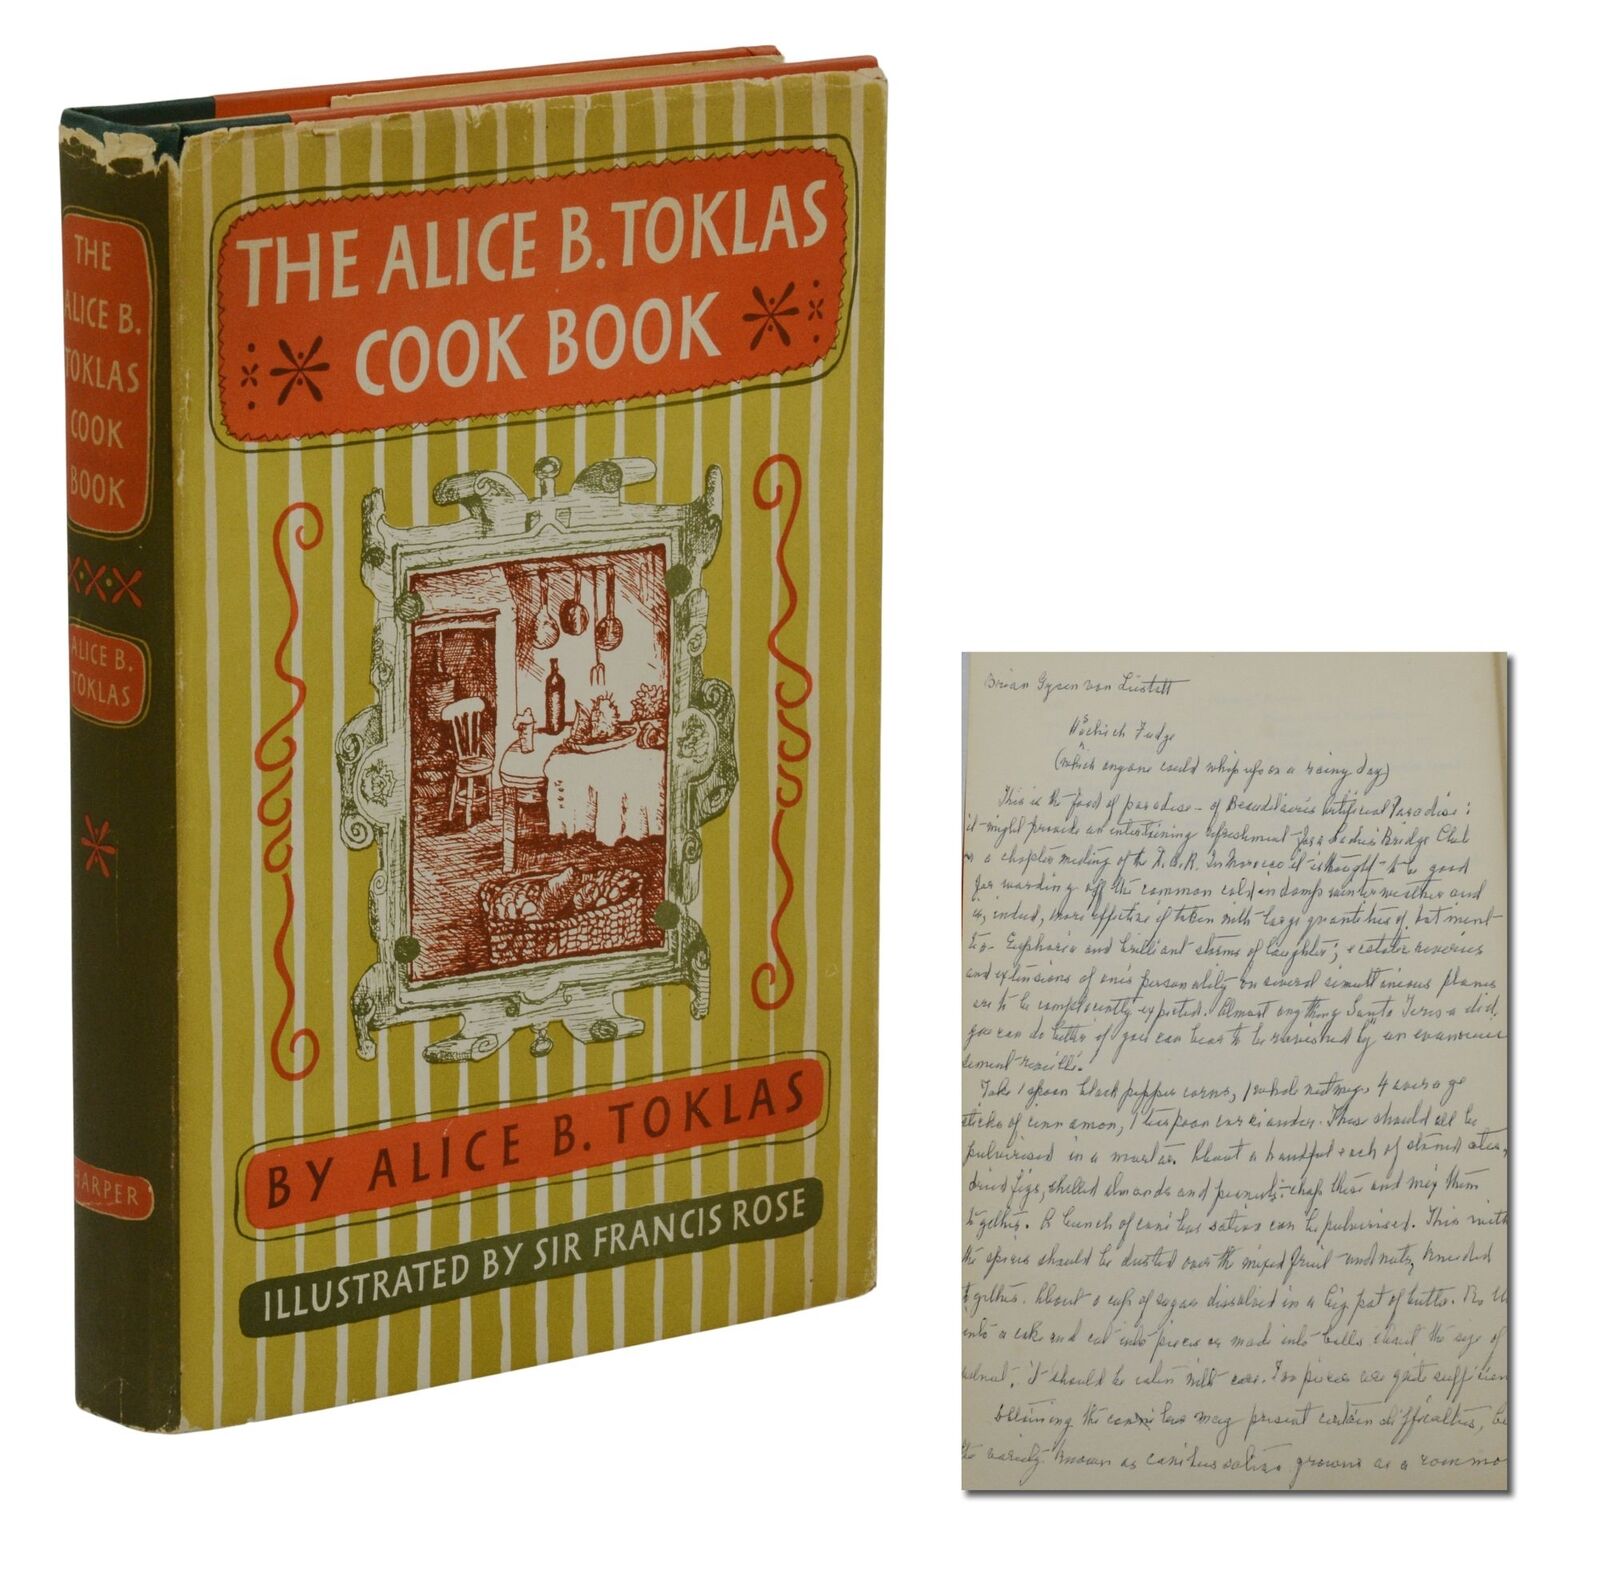 HASHISH RECIPE HANDWRITTEN BY ALICE B TOKLAS in Cook Book First Edition 1st 1954